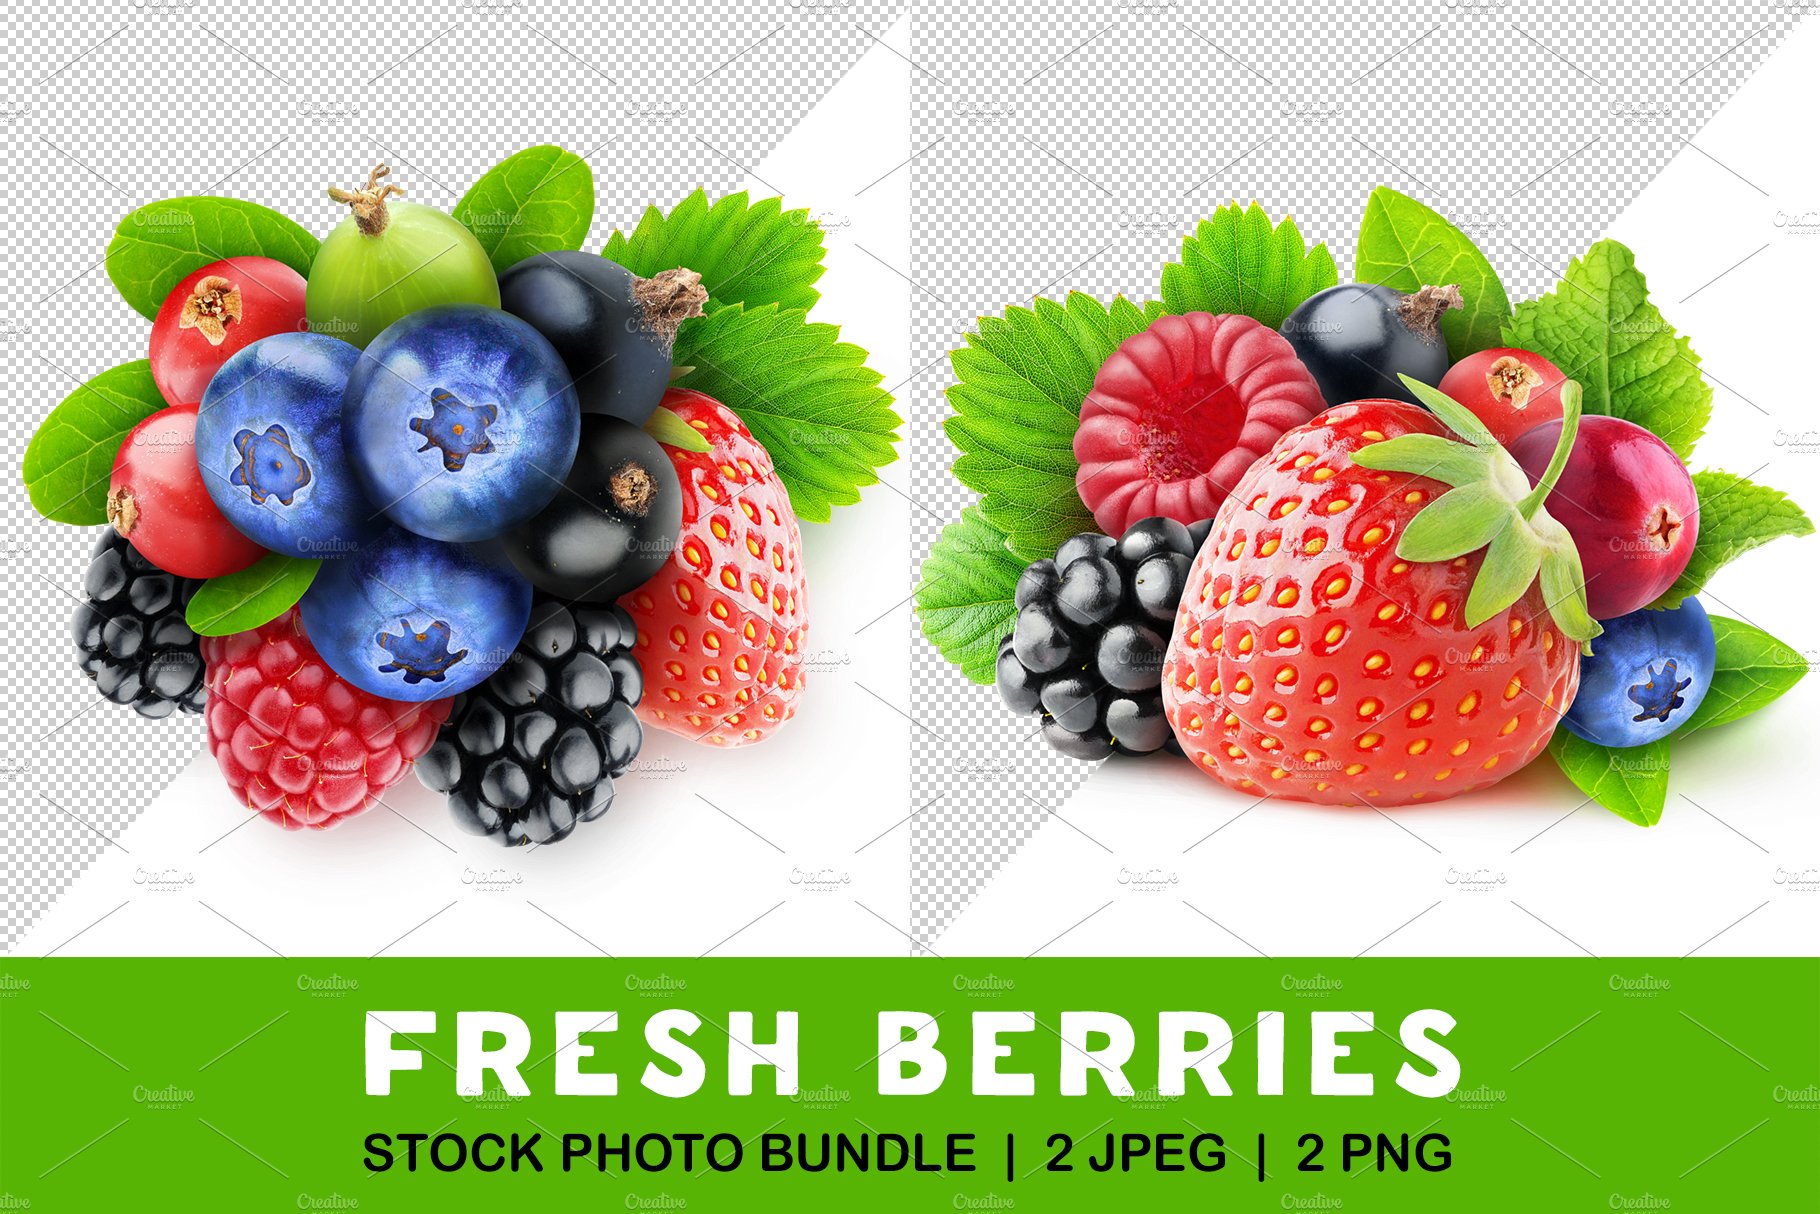 Mixed berries cover image.